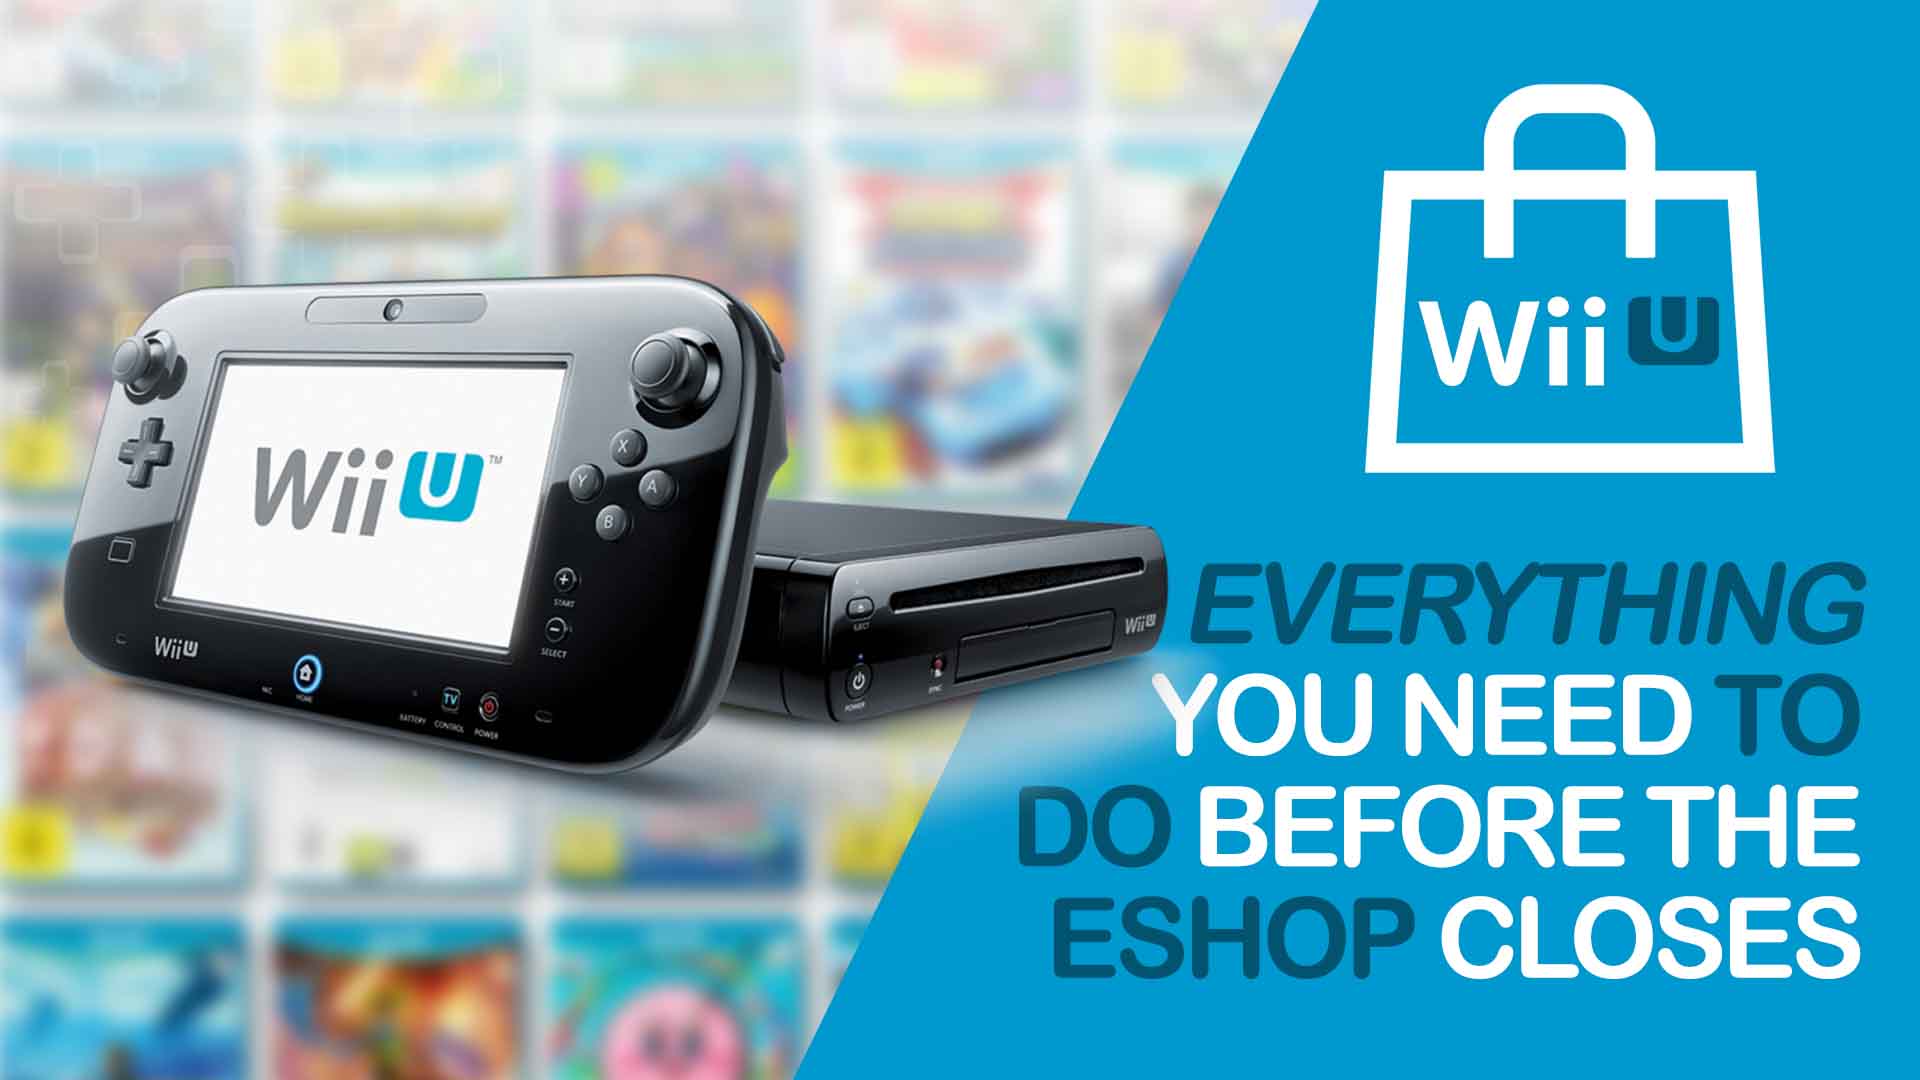 erven Archeoloog Microbe Guide - The Wii U eShop closes soon – here's everything you need to know  (or get) - Nintendo Wire